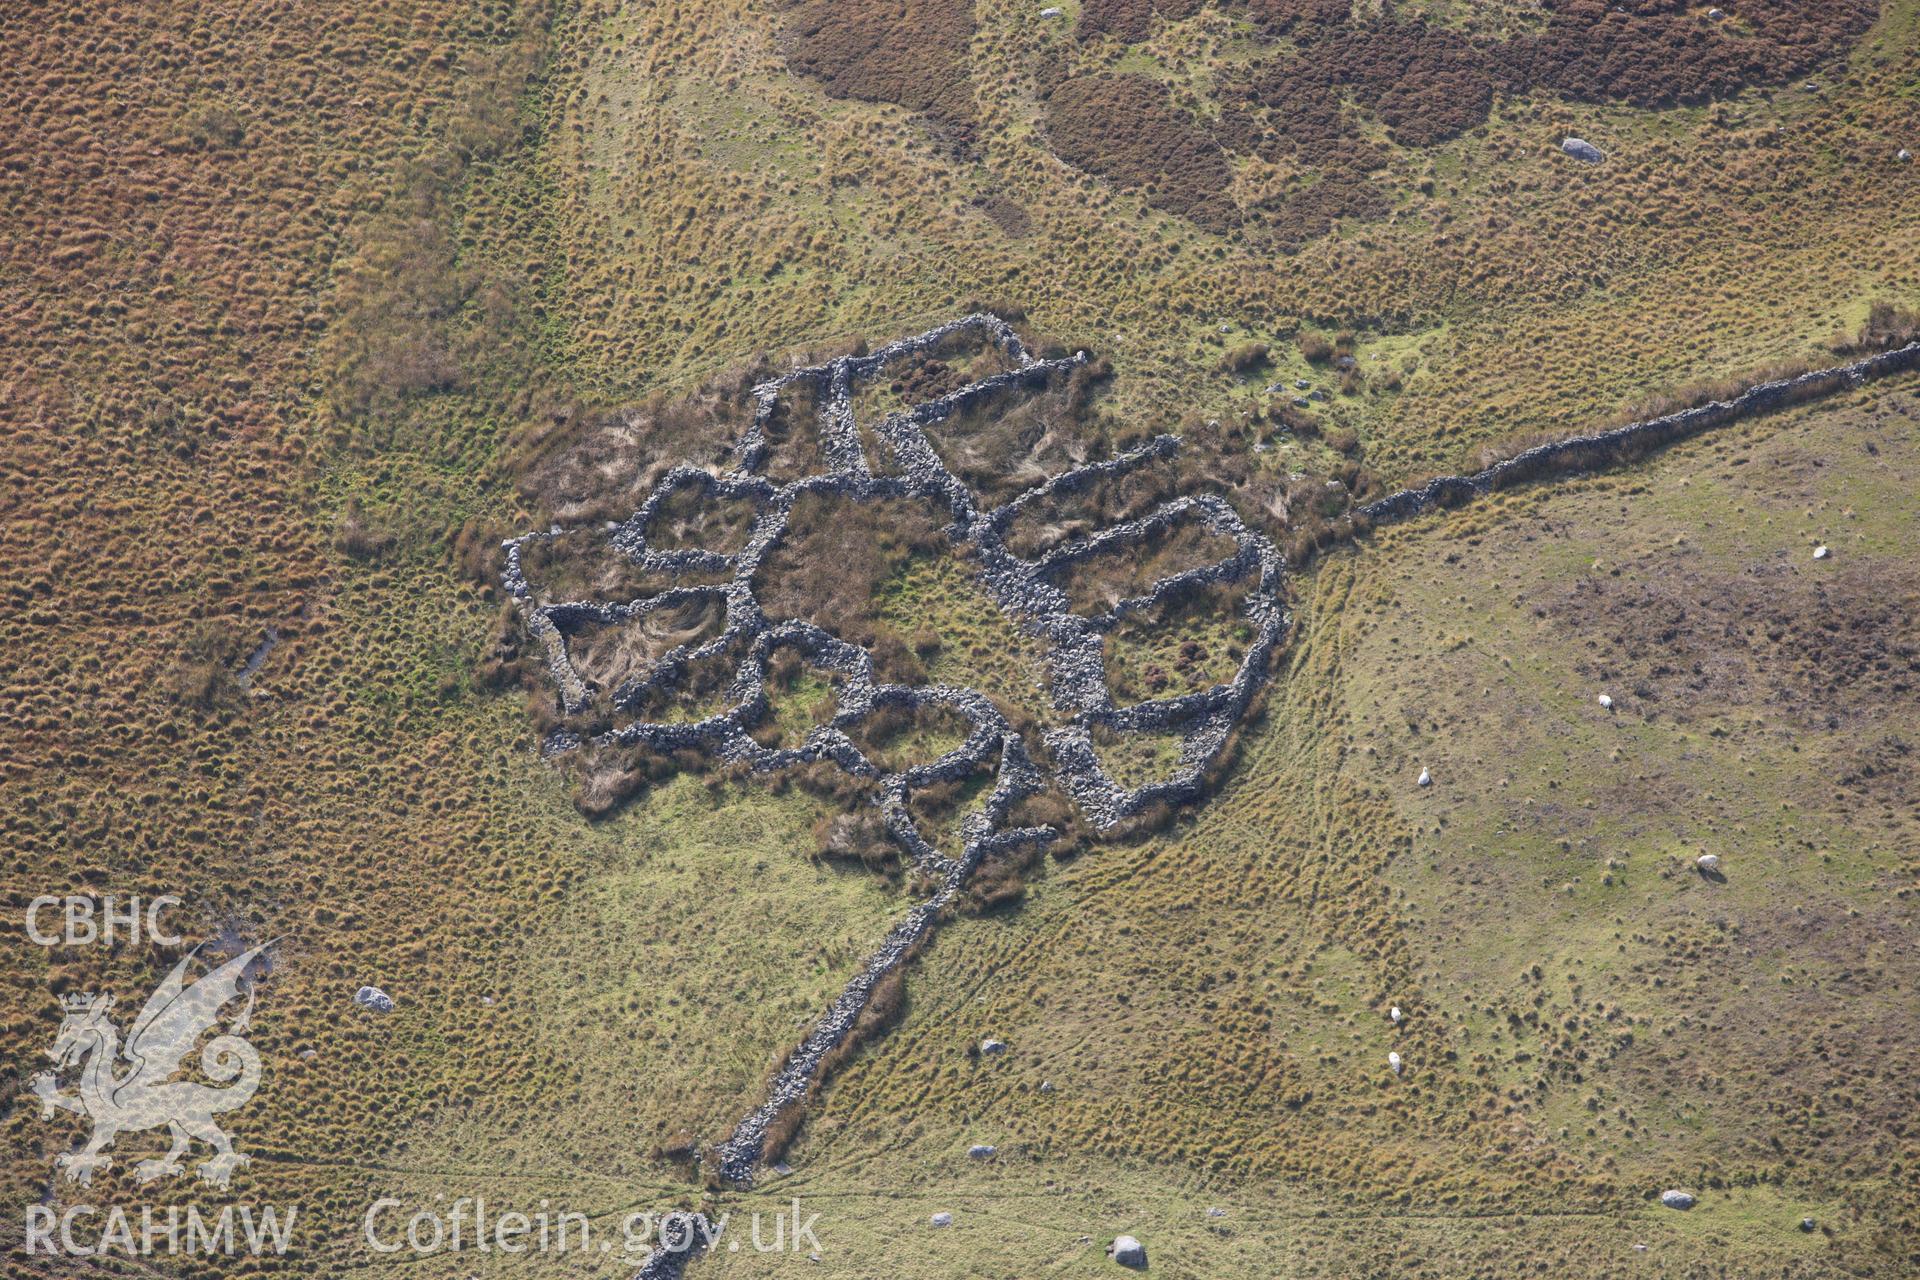 RCAHMW colour oblique aerial photograph of a multi-cellular sheepfold southeast of Dorwen. Taken on 14 October 2009 by Toby Driver